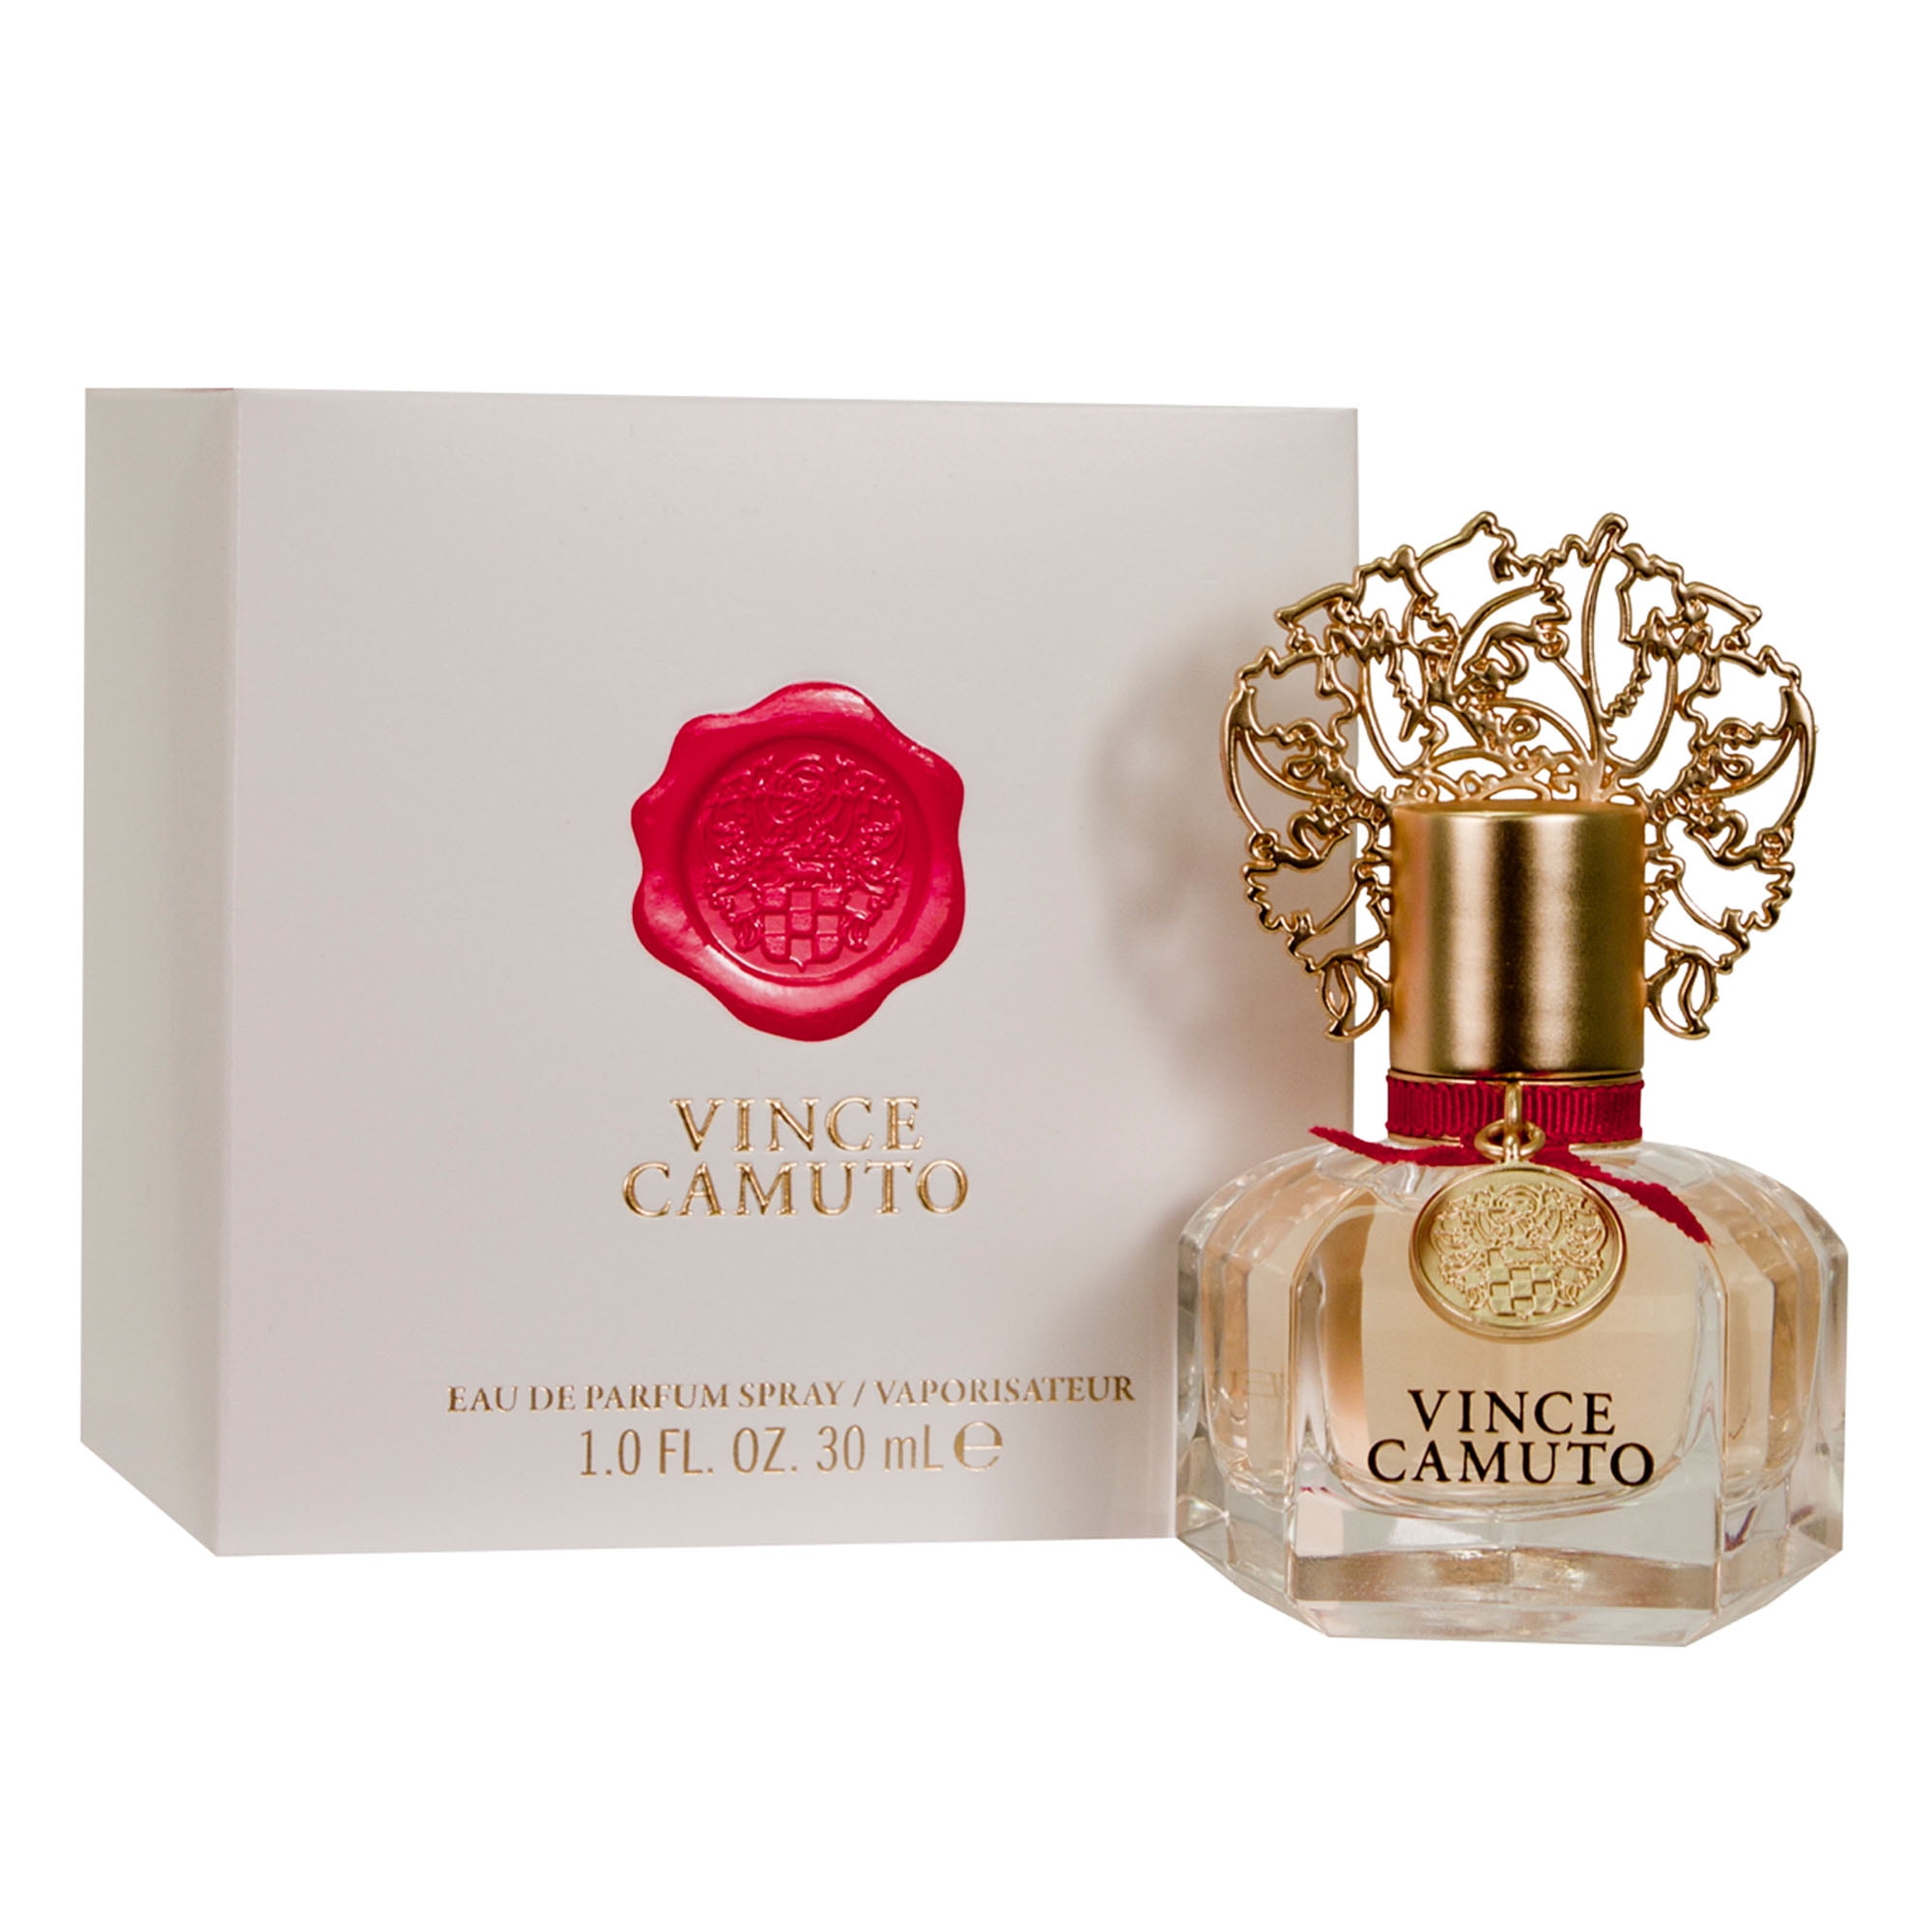 Vince Camuto For Women 1.0 oz EDP Spray By Vince Camuto - Walmart.com